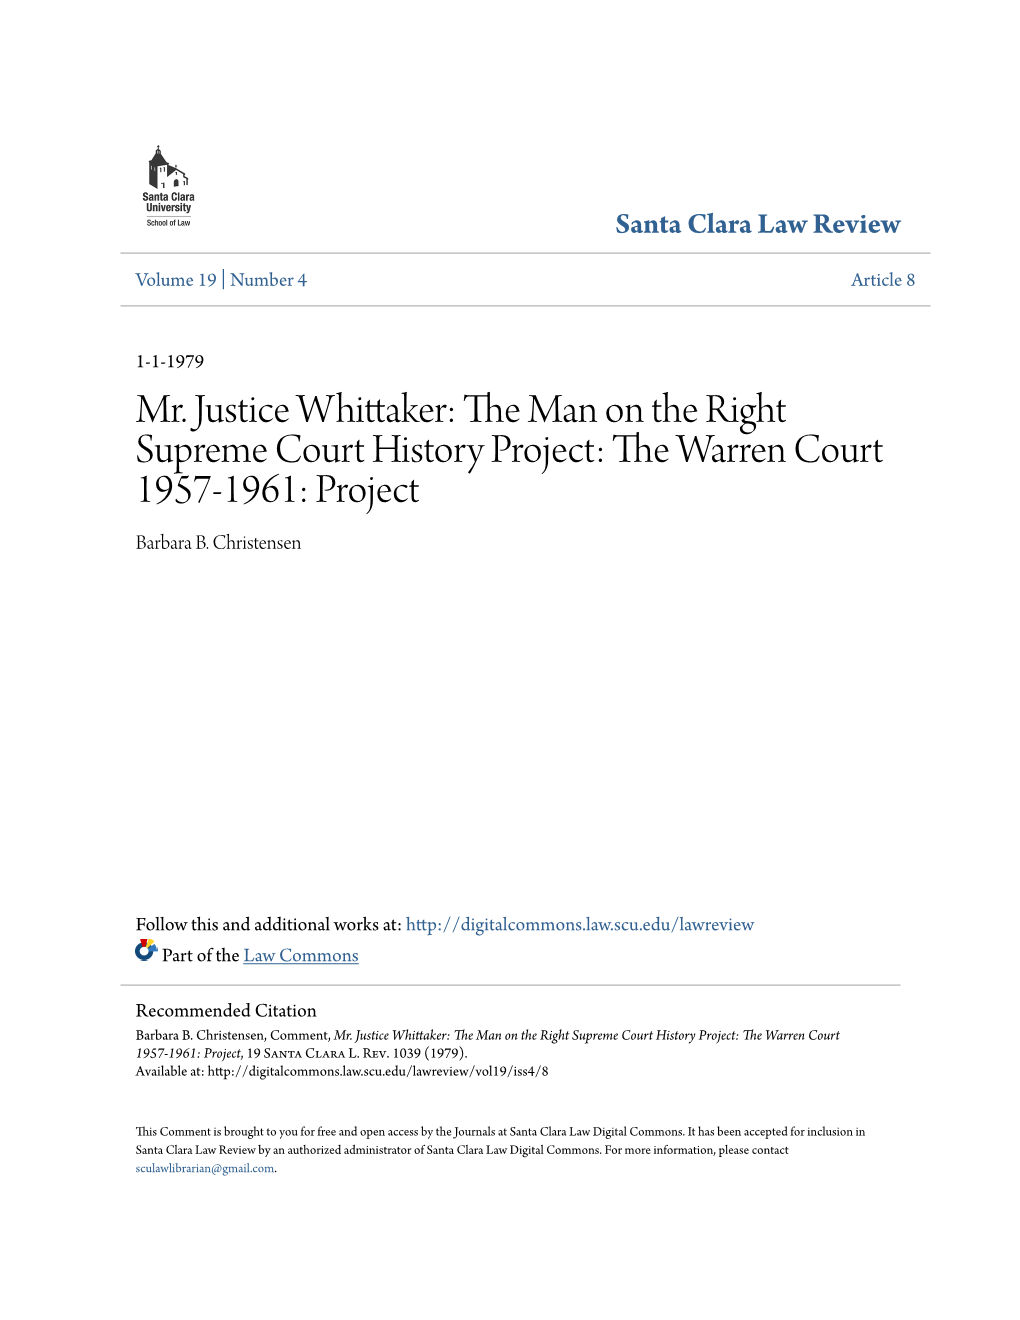 Mr. Justice Whittaker: the Am N on the Right Supreme Court History Project: the Aw Rren Court 1957-1961: Project Barbara B